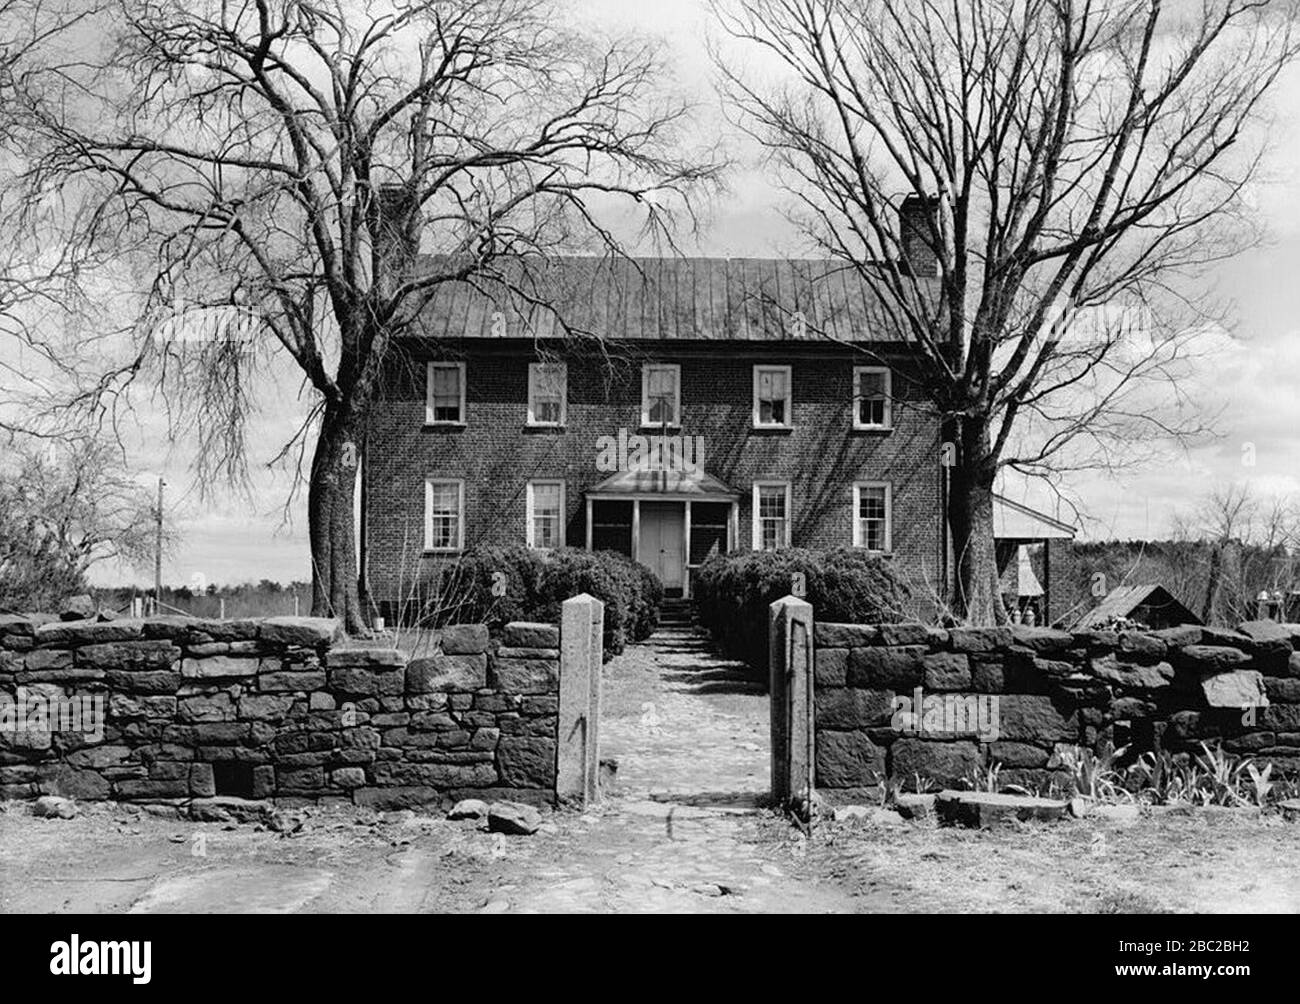 Green Hill Plantation & Main House, State Route 728, Long Island in der Nähe (Campbell County, Virginia). Stockfoto